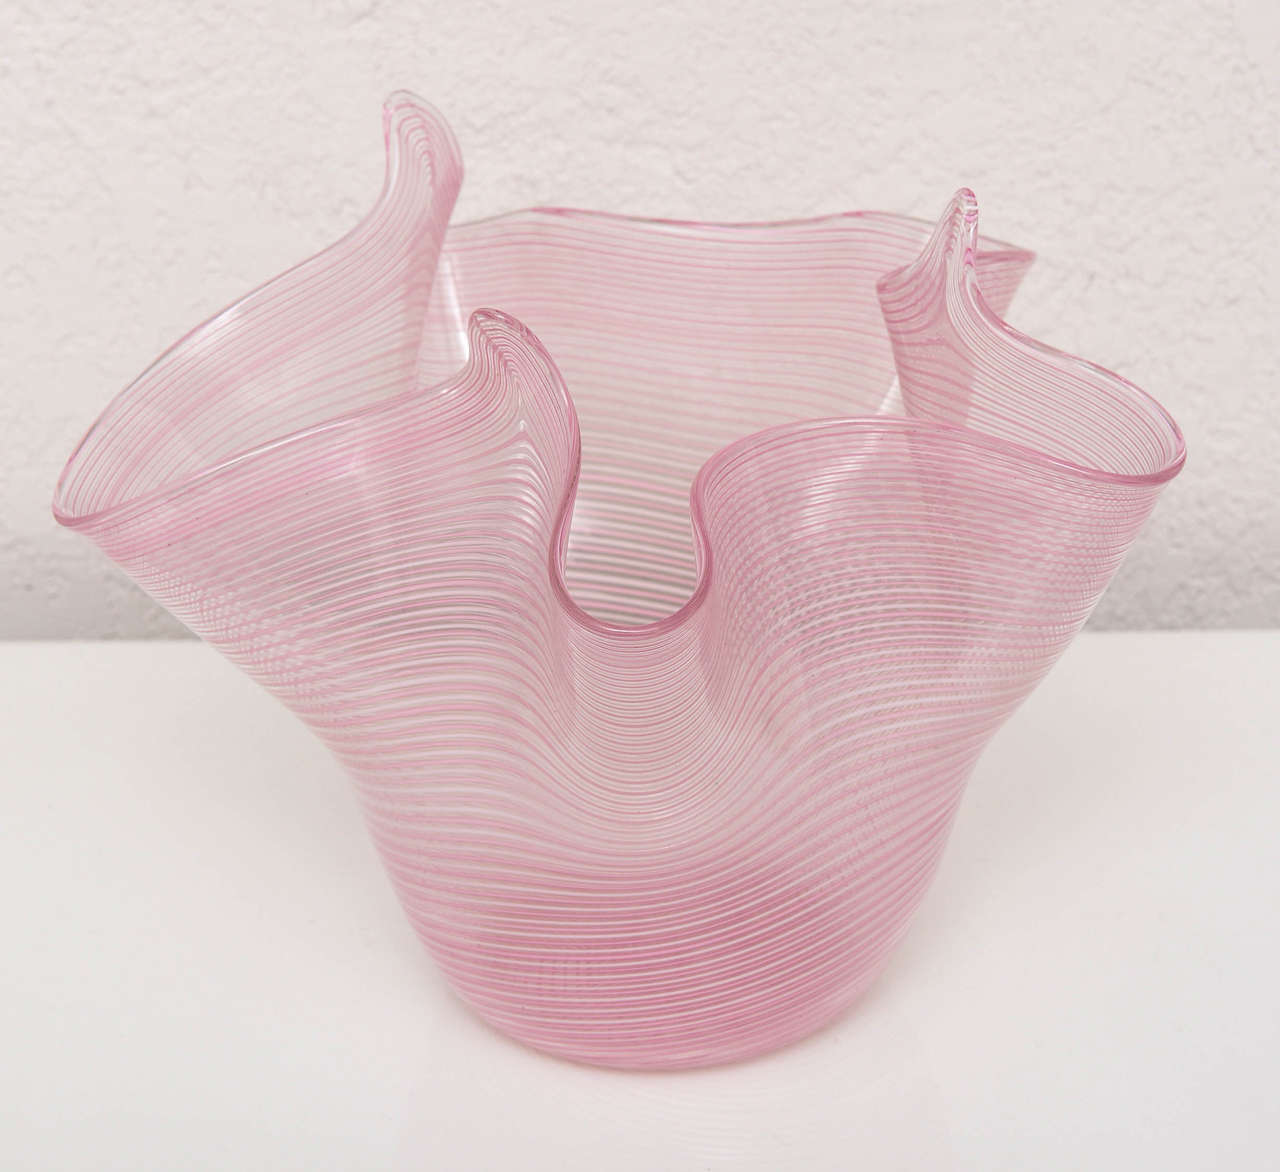 Murano handkerchief bowl or vase with a delicate horizontal stripe pattern of pink, white and clear.

Please feel free to contact us directly for the best price, a shipping quote or any additional information by clicking 